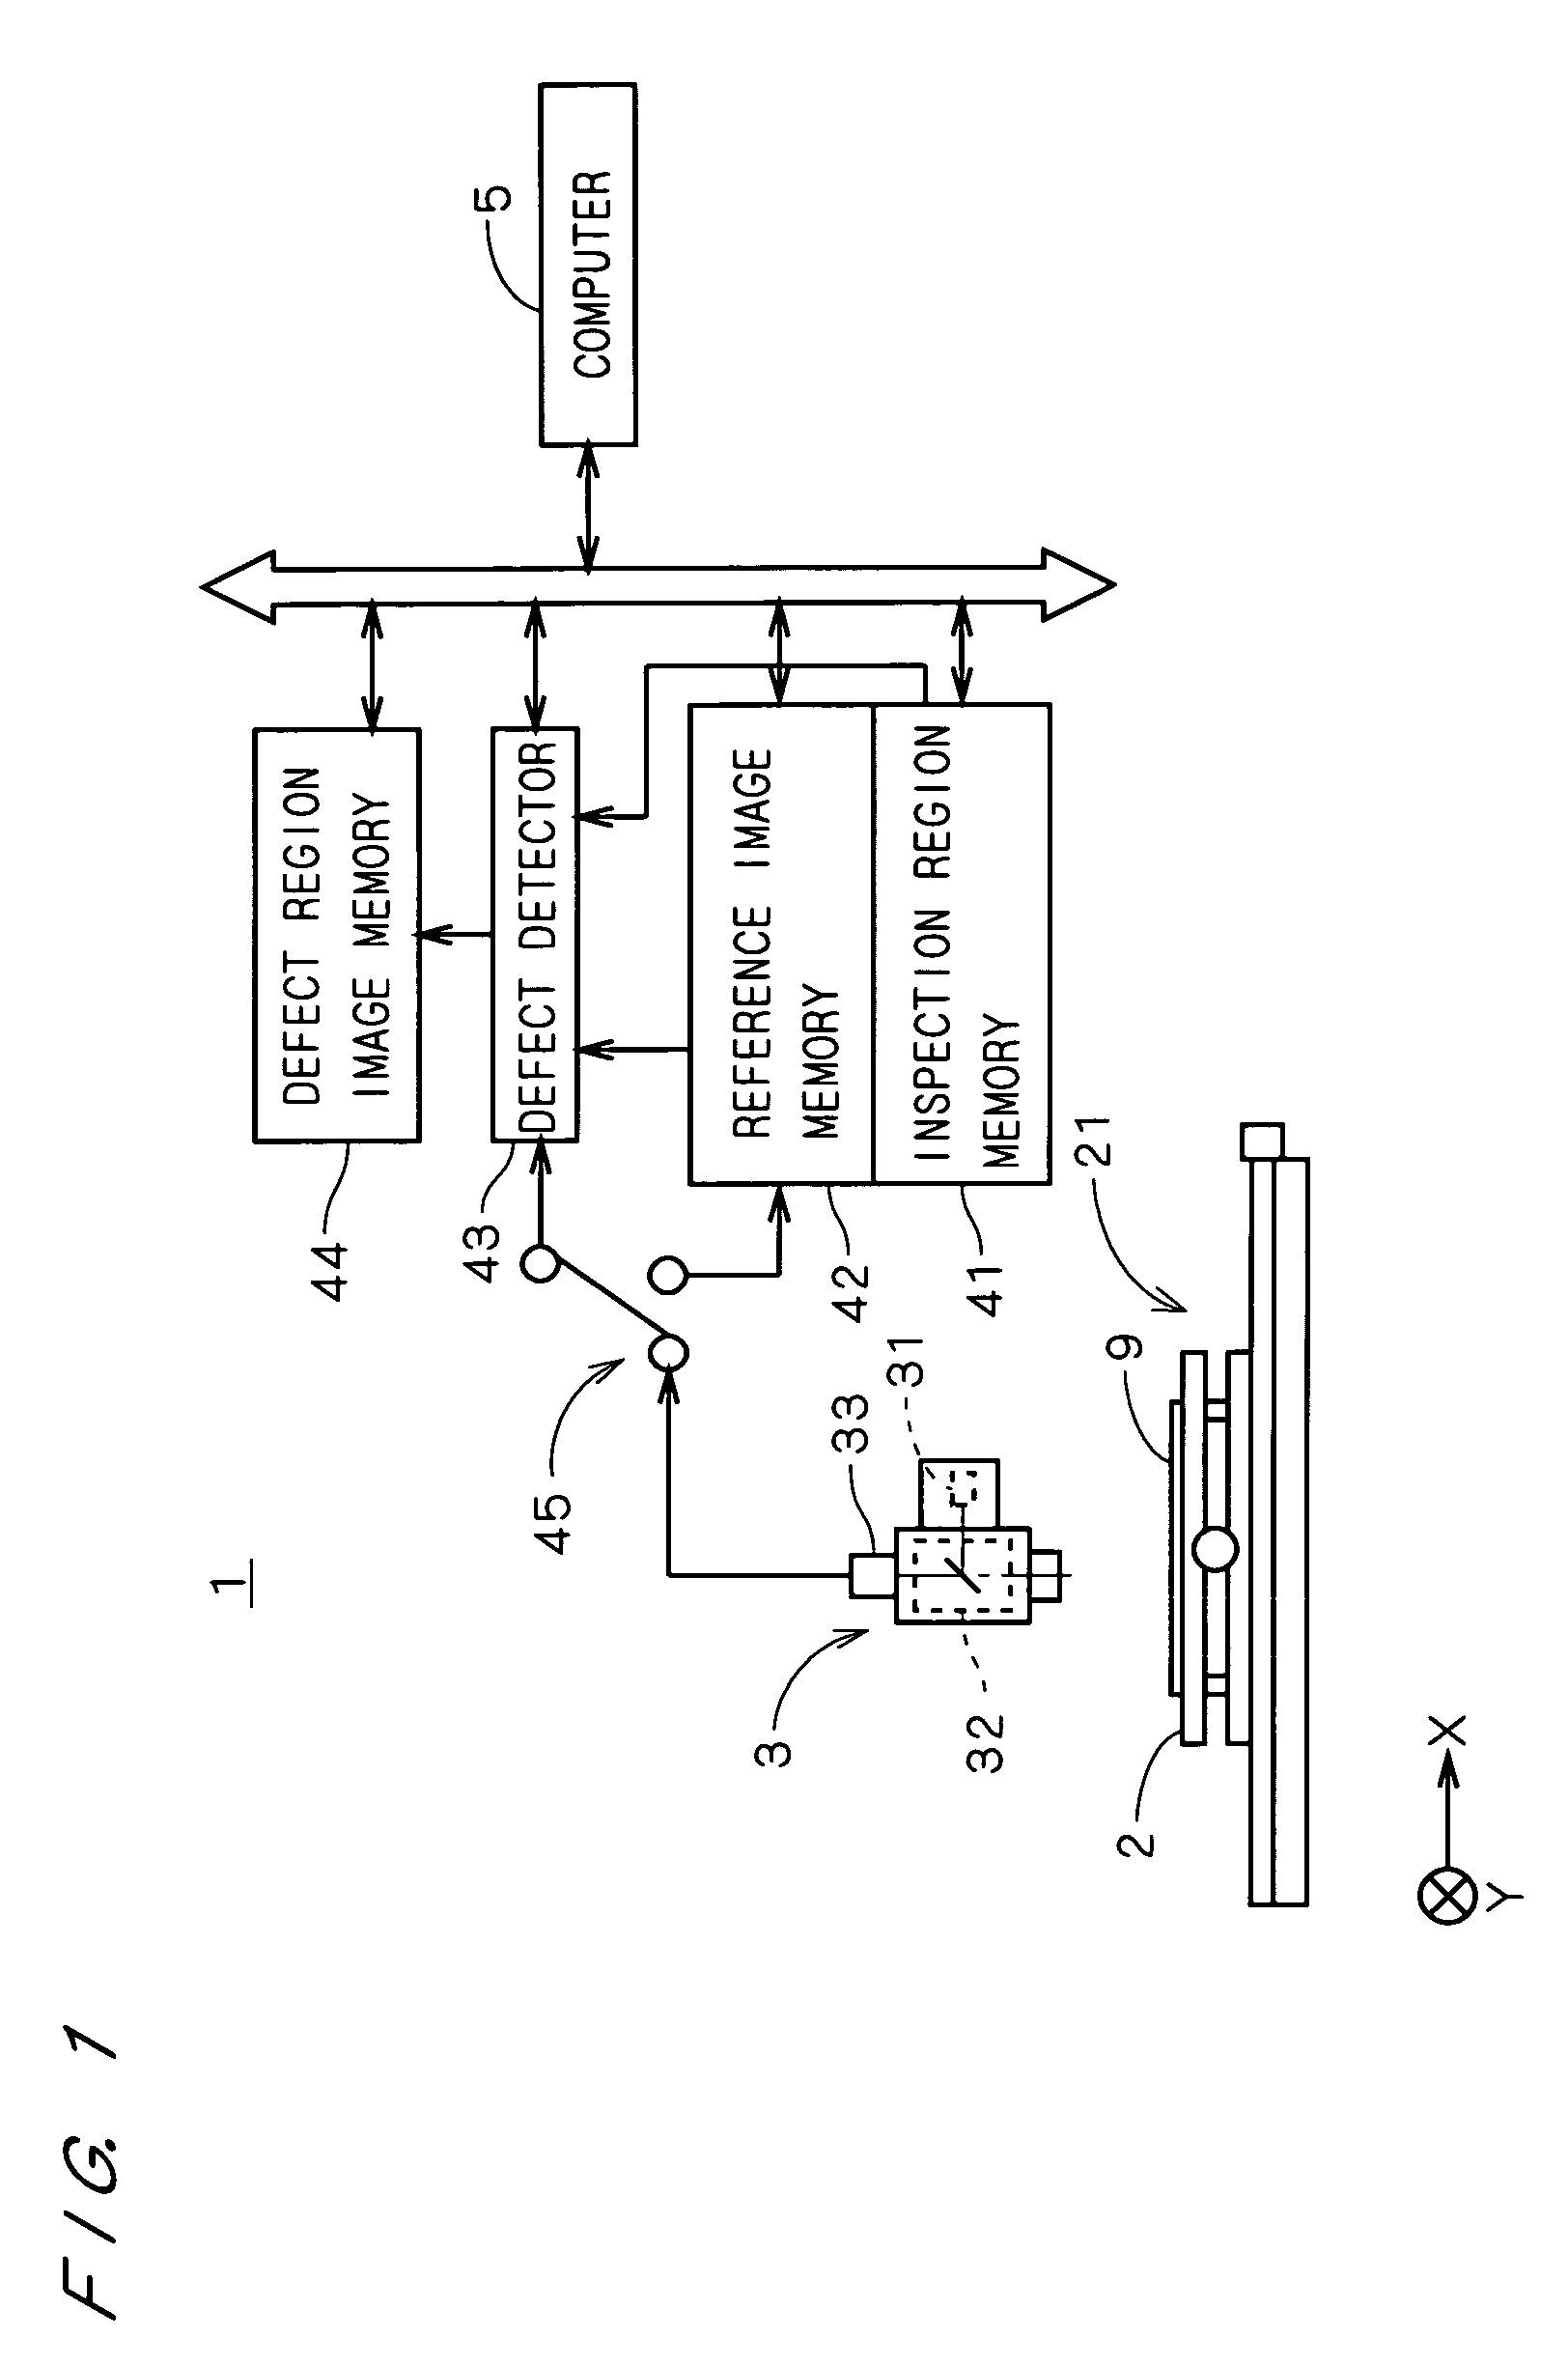 Defect detection apparatus and defect detection method